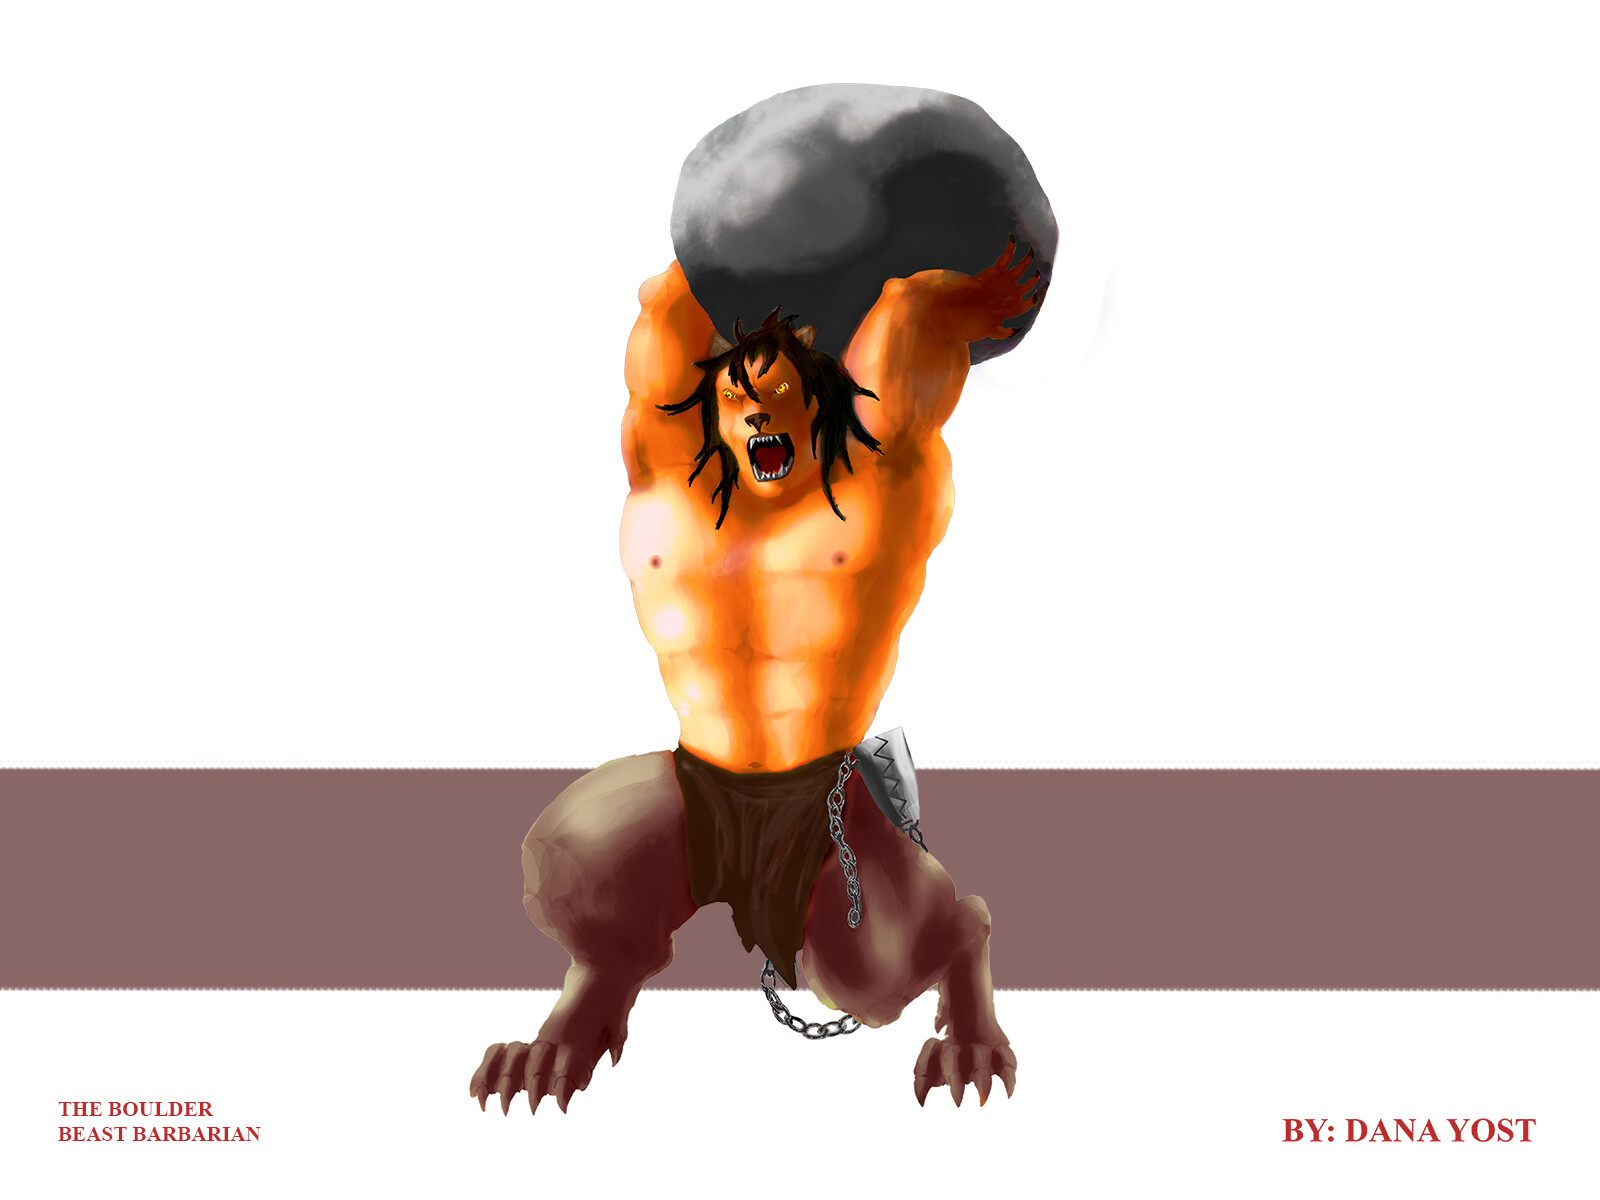 Character concept: The Boulder, human-beast hybrid barbarian